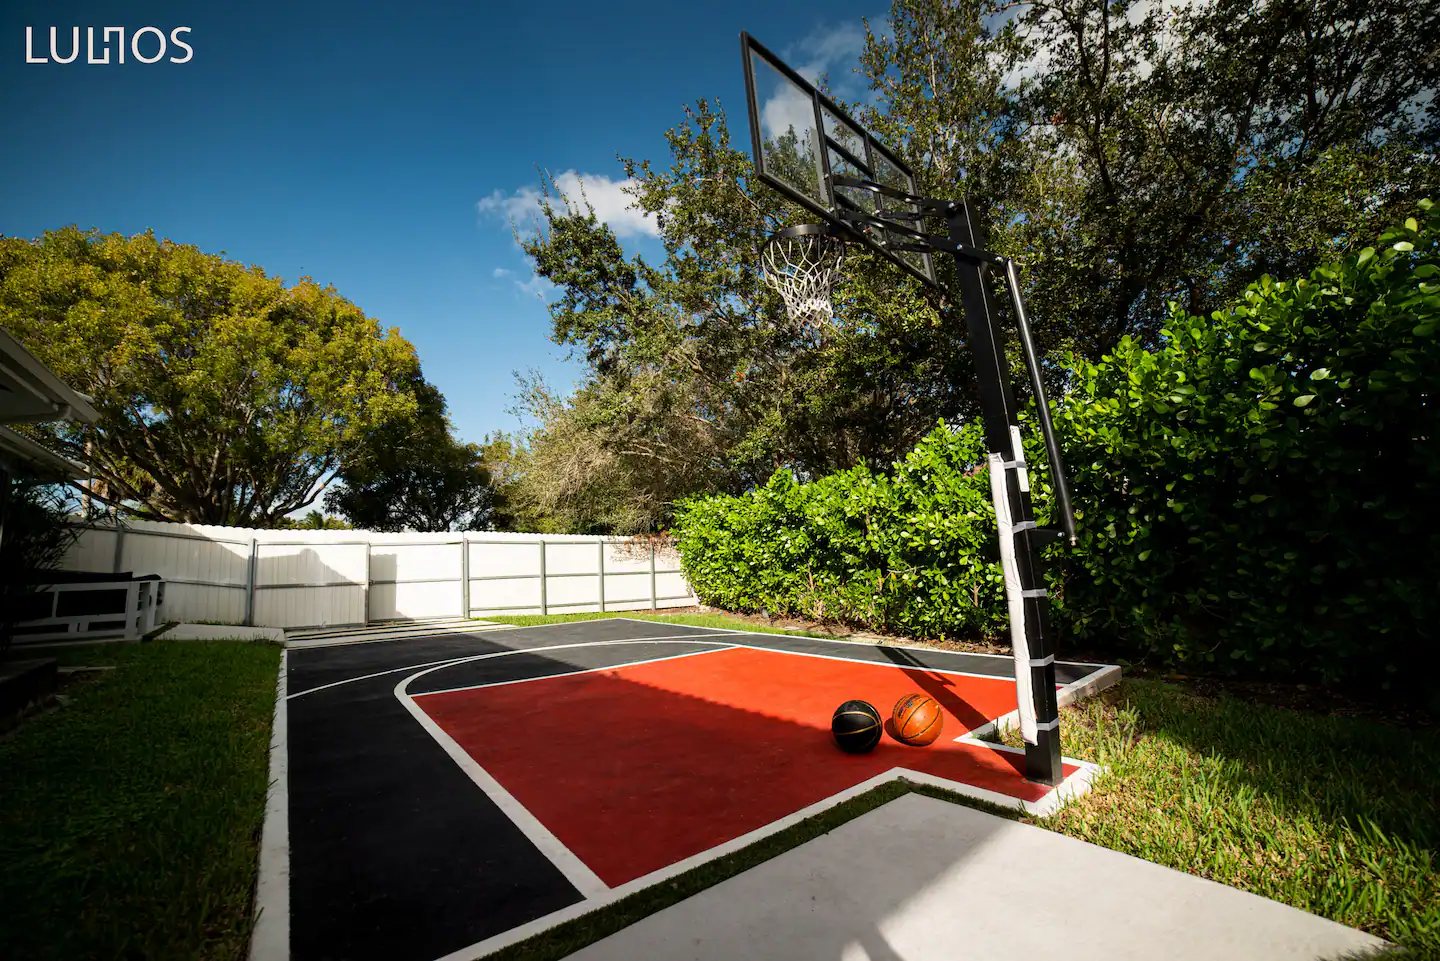 Challenge your skills in our half basketball court.